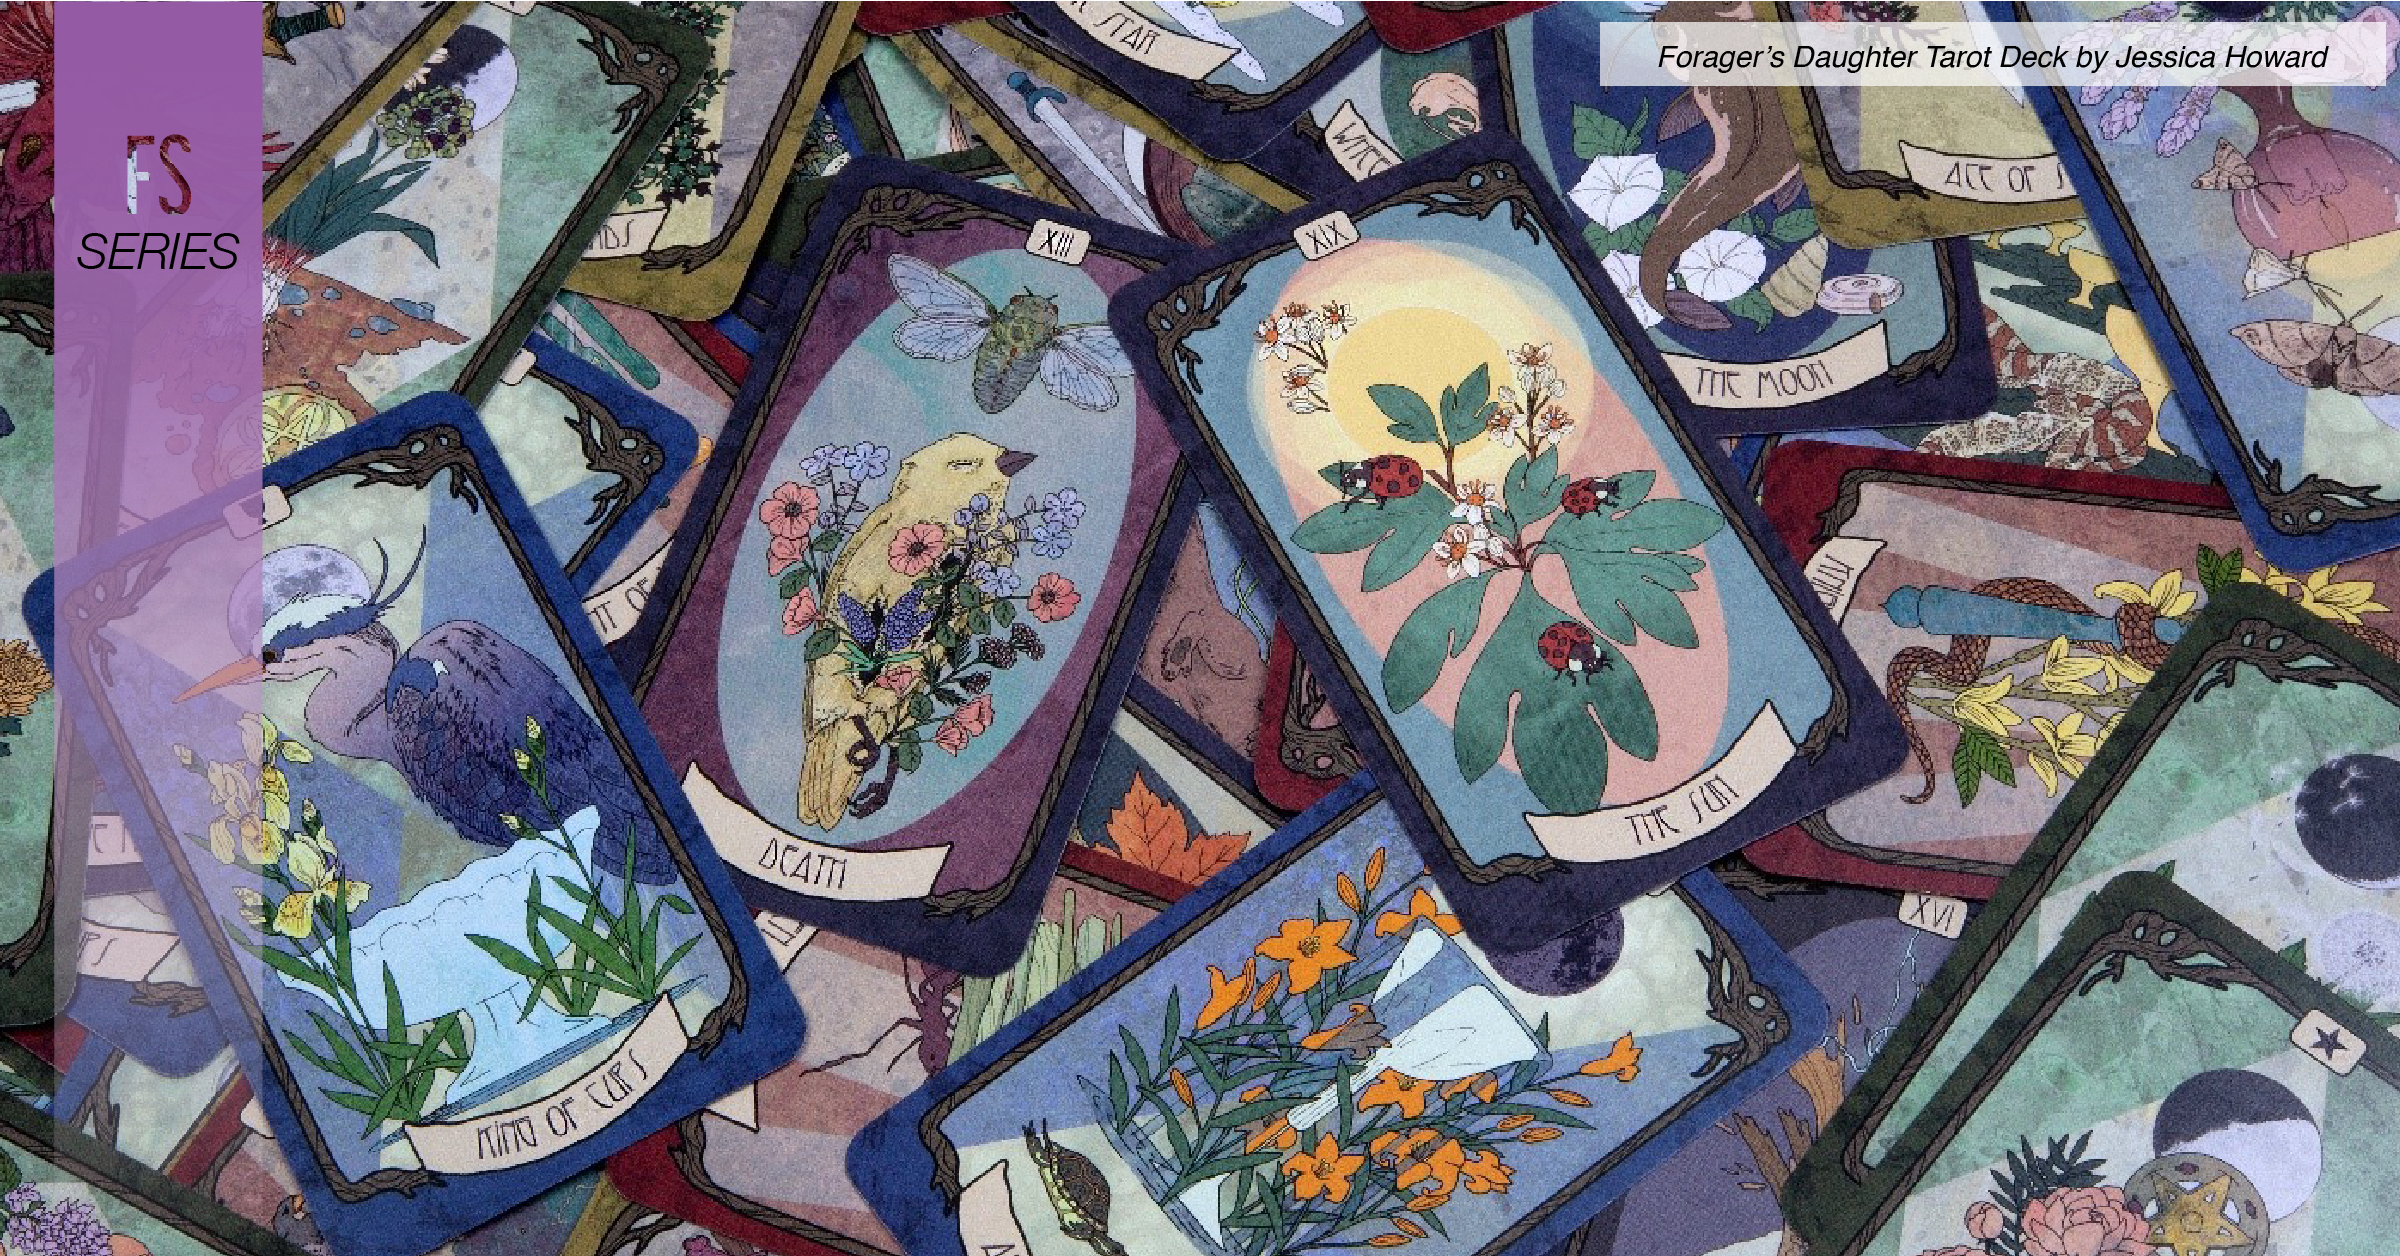 Who is Forager's Daughter - tarot deck pile